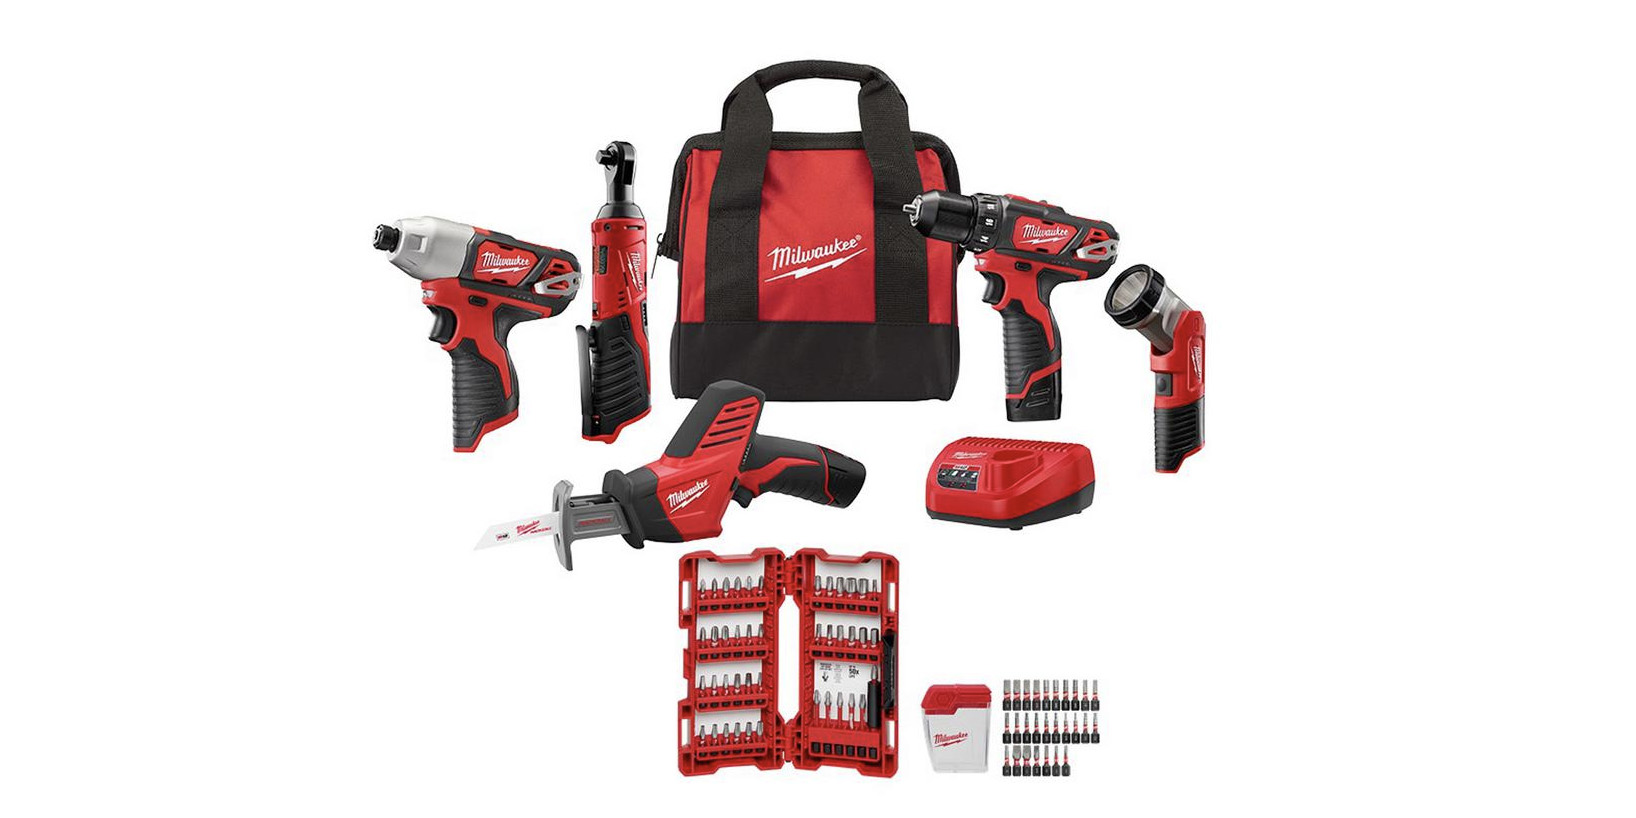 a-milwaukee-tool-kit-with-tools-and-accessories